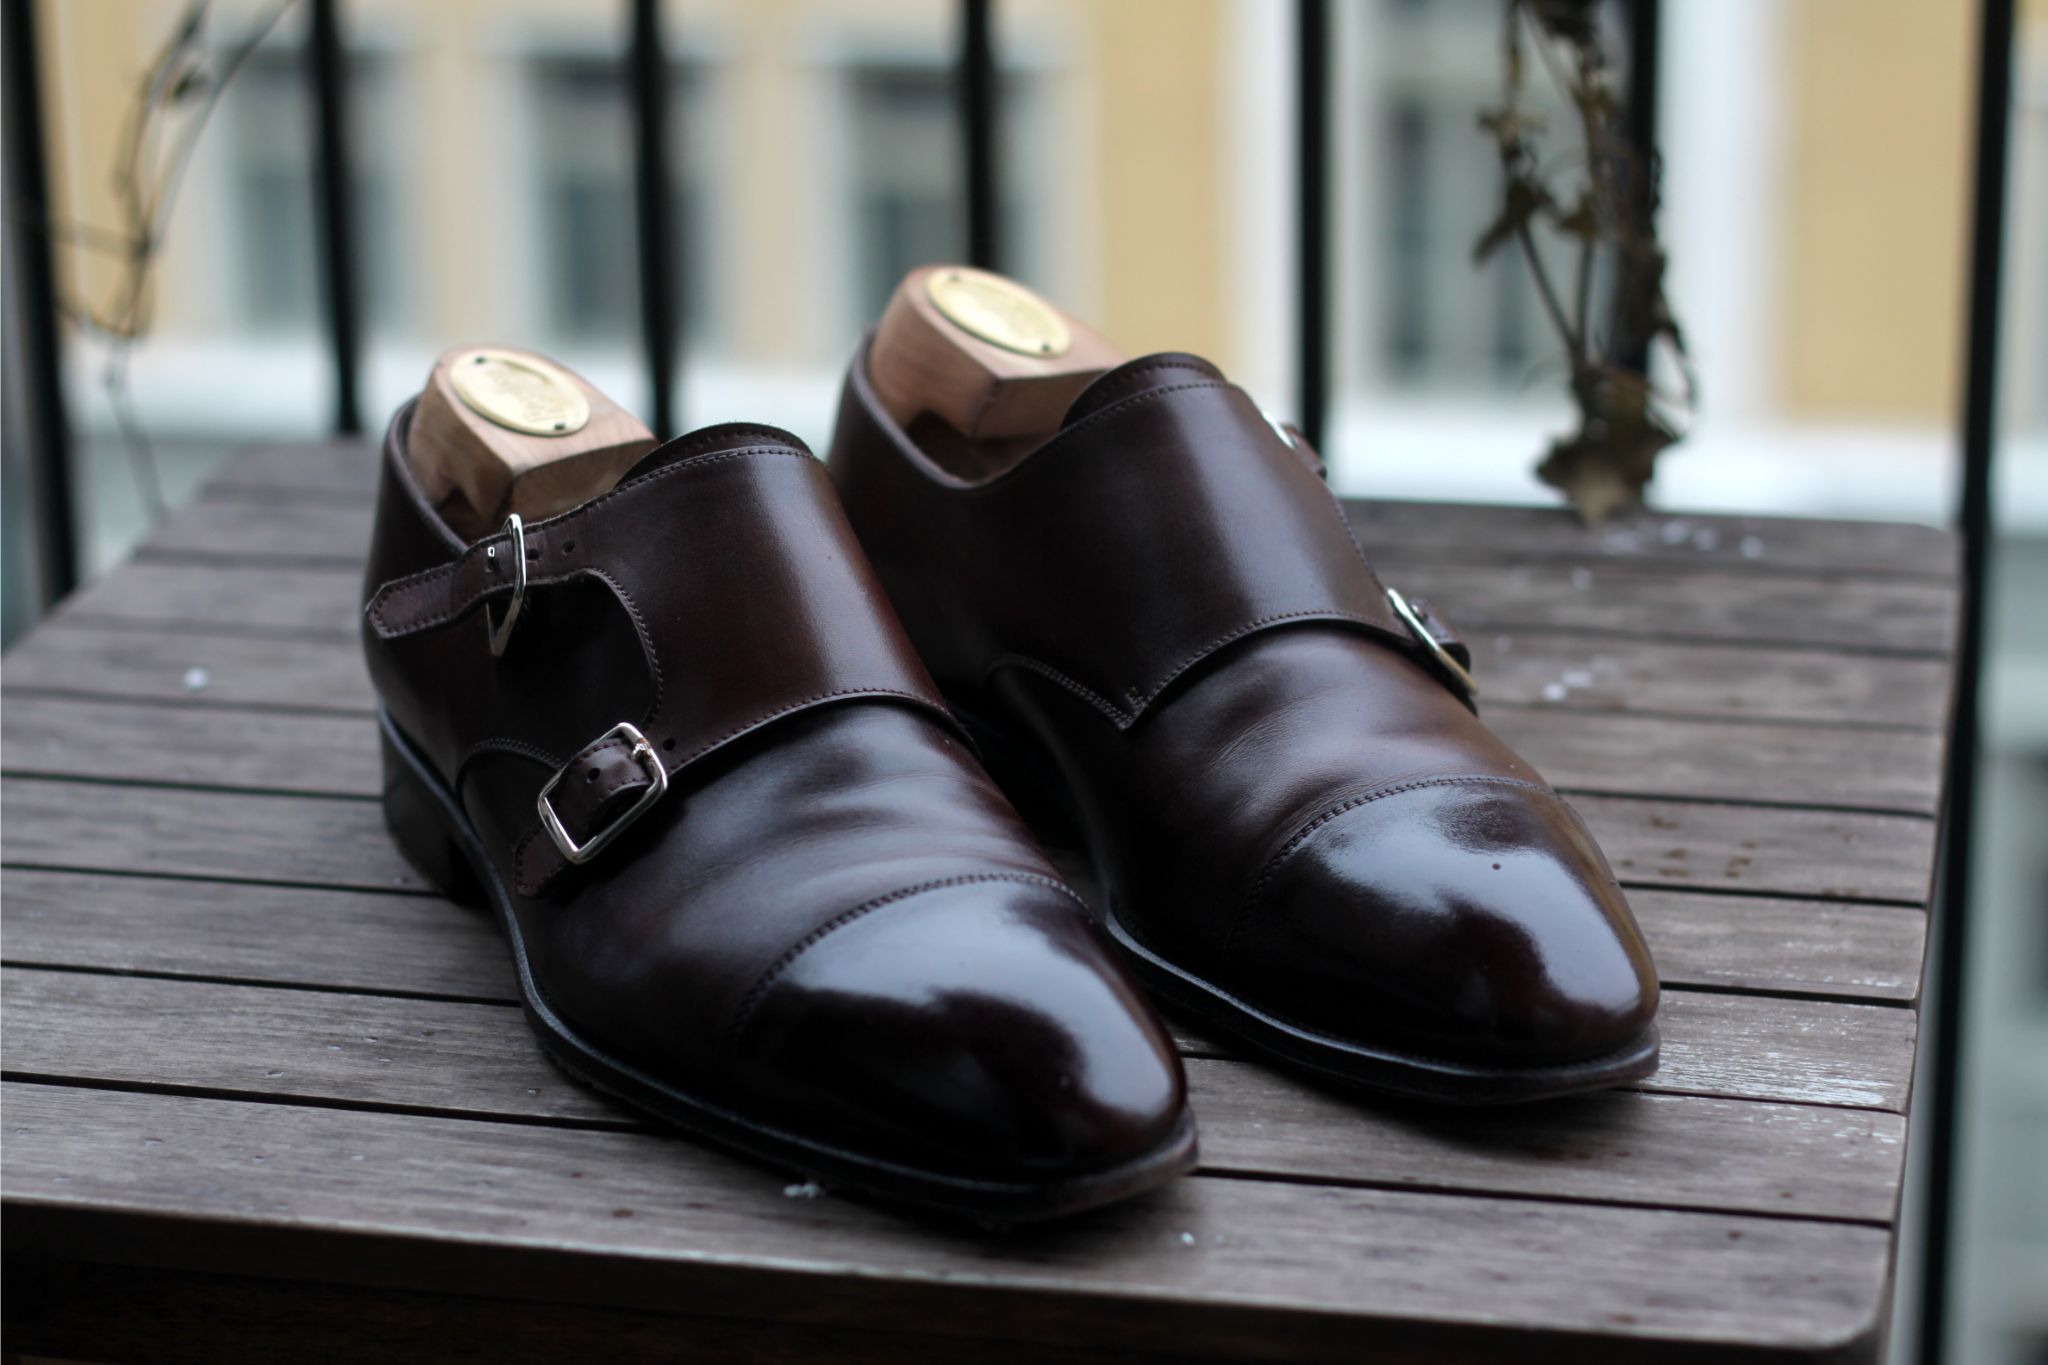 How to take care of your shoes - A pair of double-monks after restoring, cleaning and polishing.